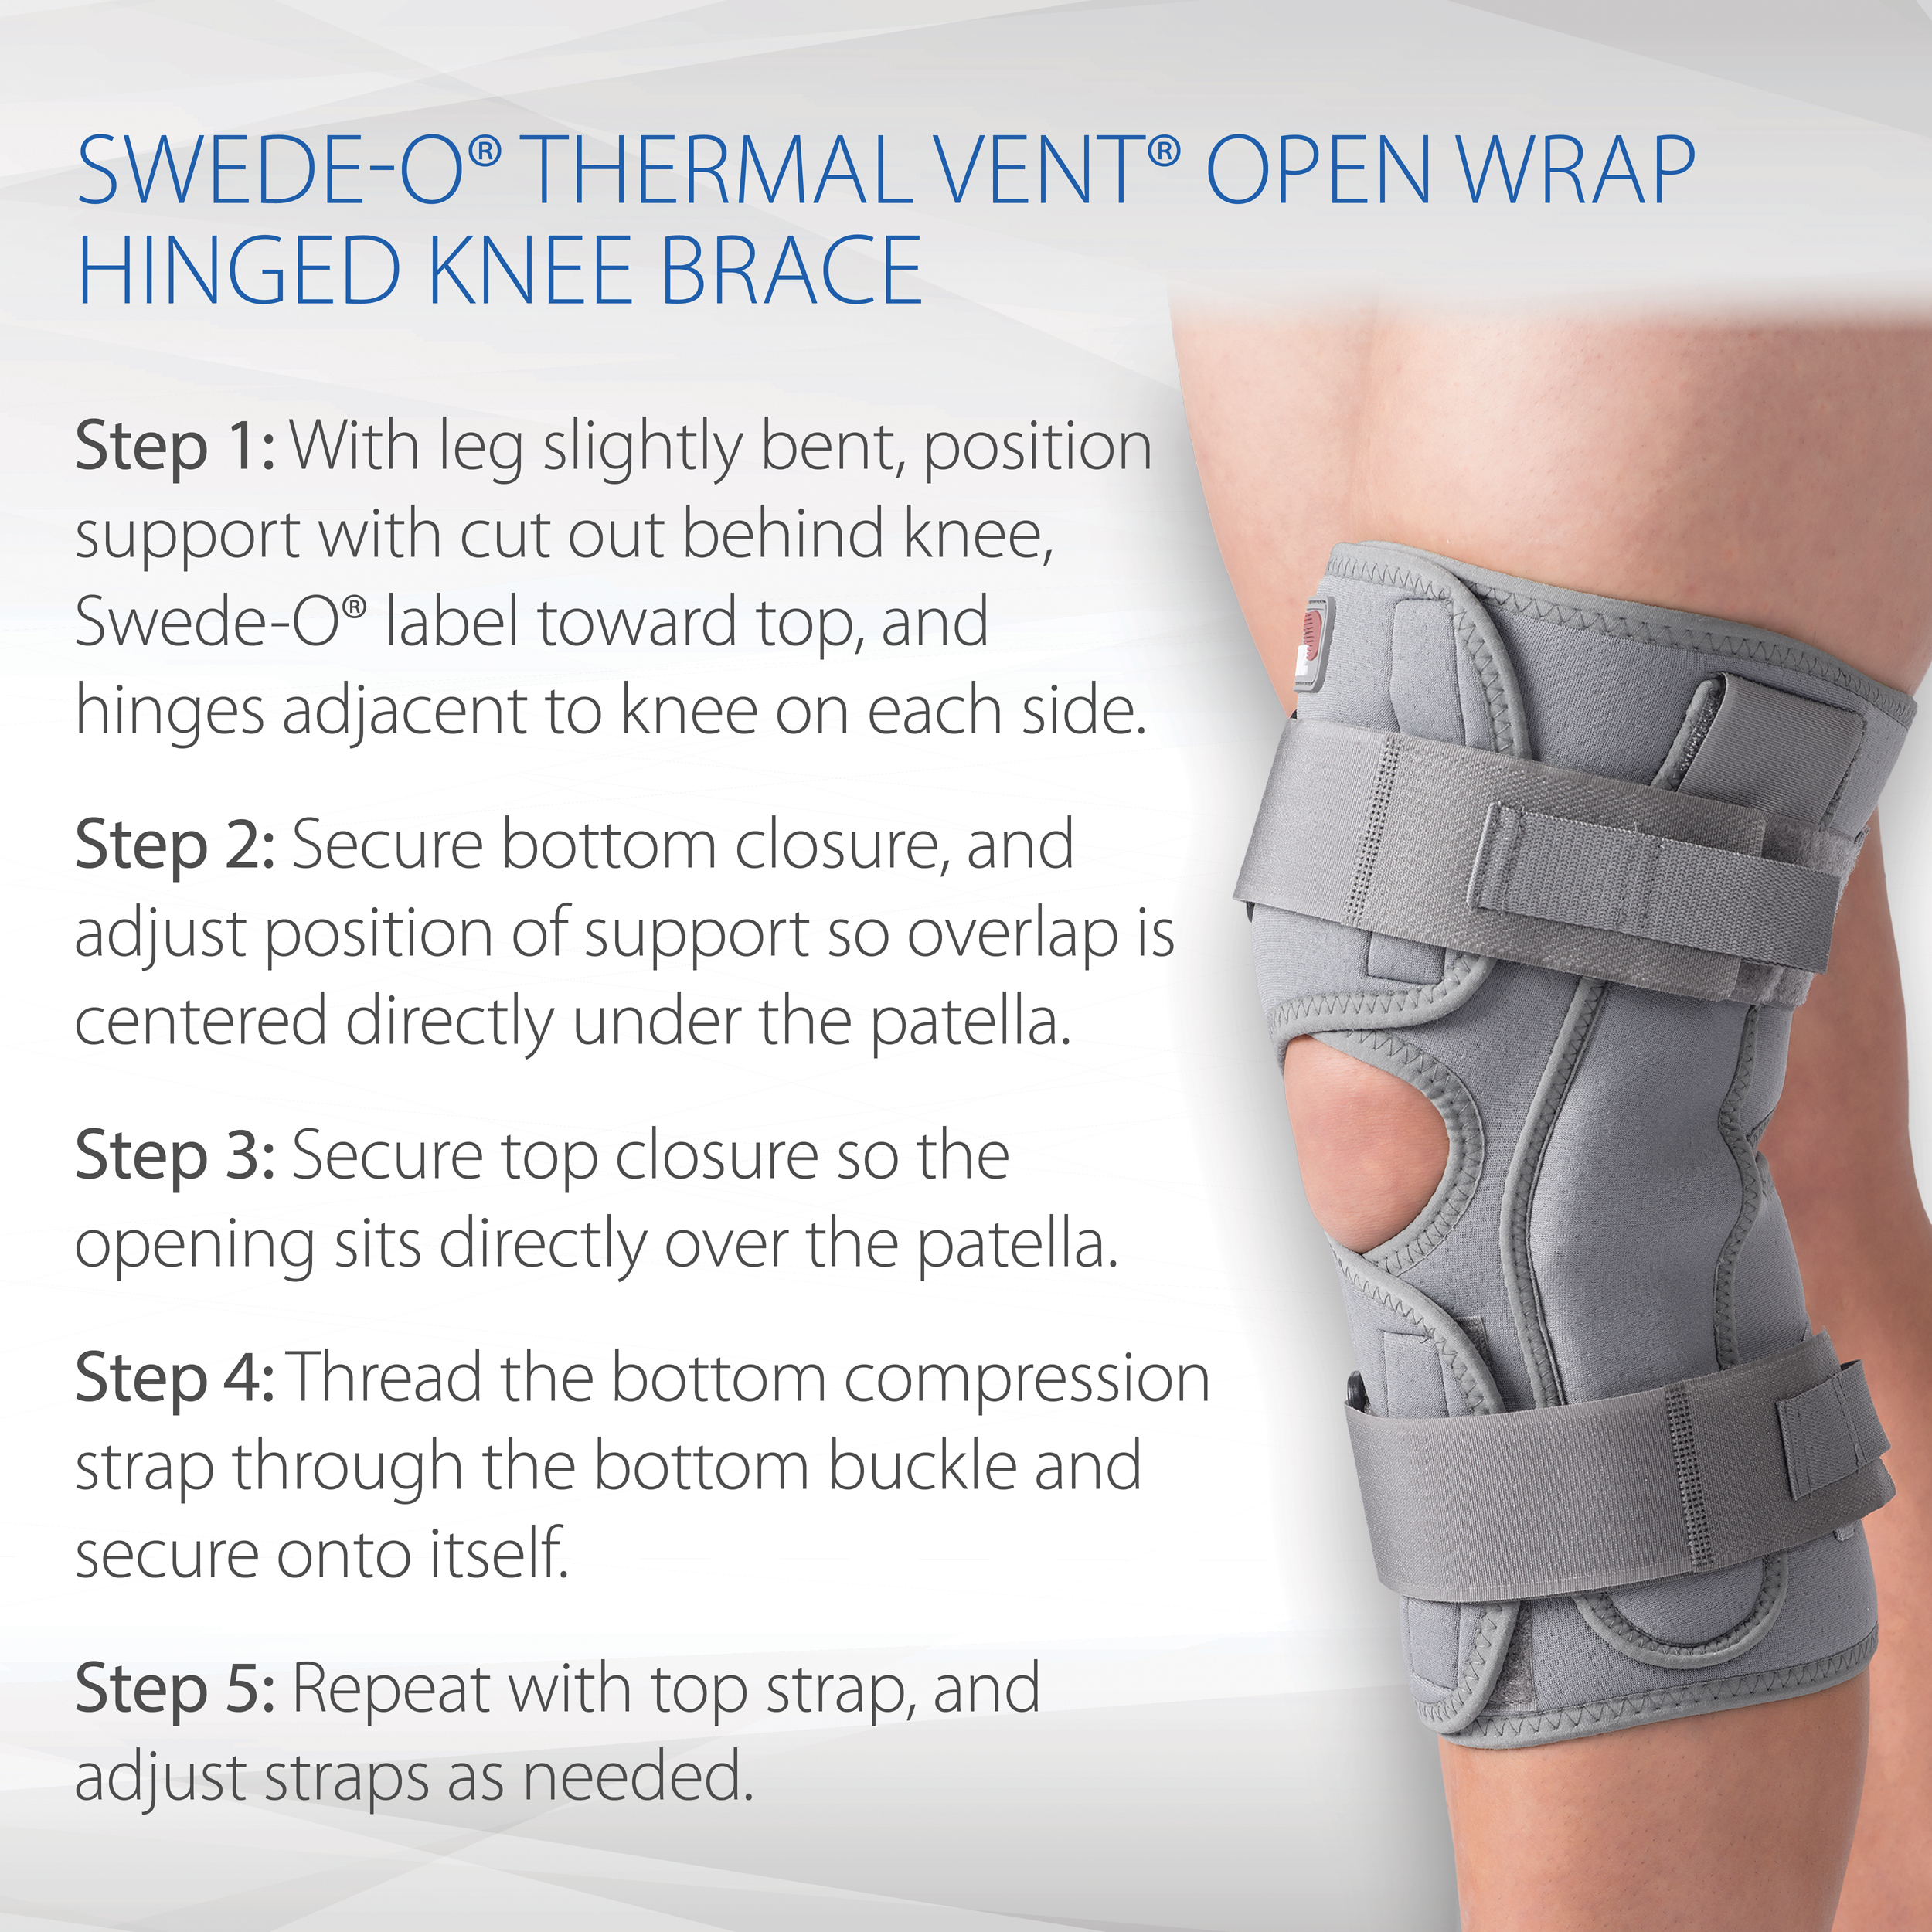 Hinged Knee Brace - What You Need to Know